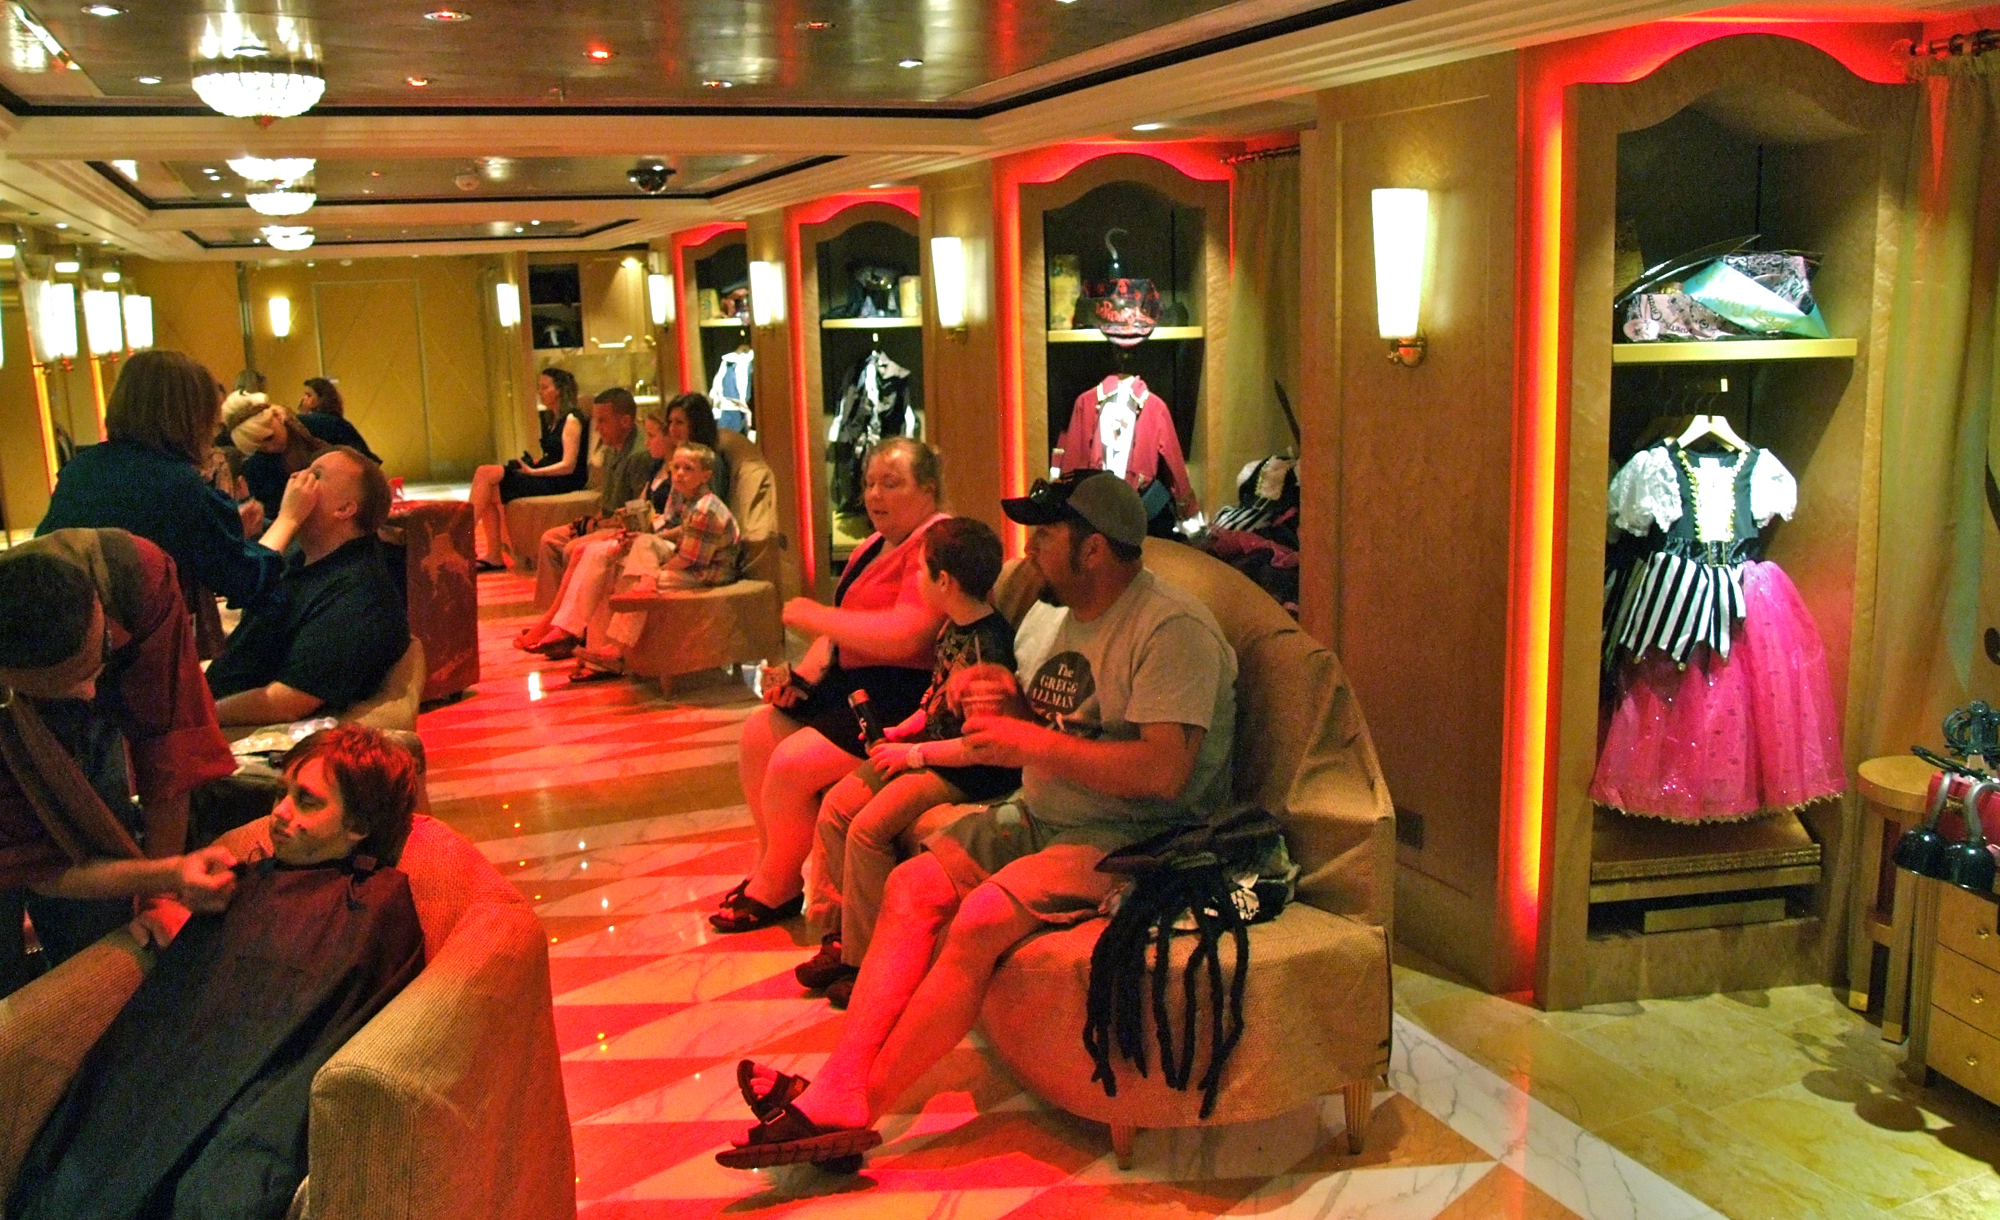 Pirate's Night Preparations at Pirate's League on the Disney Fantasy